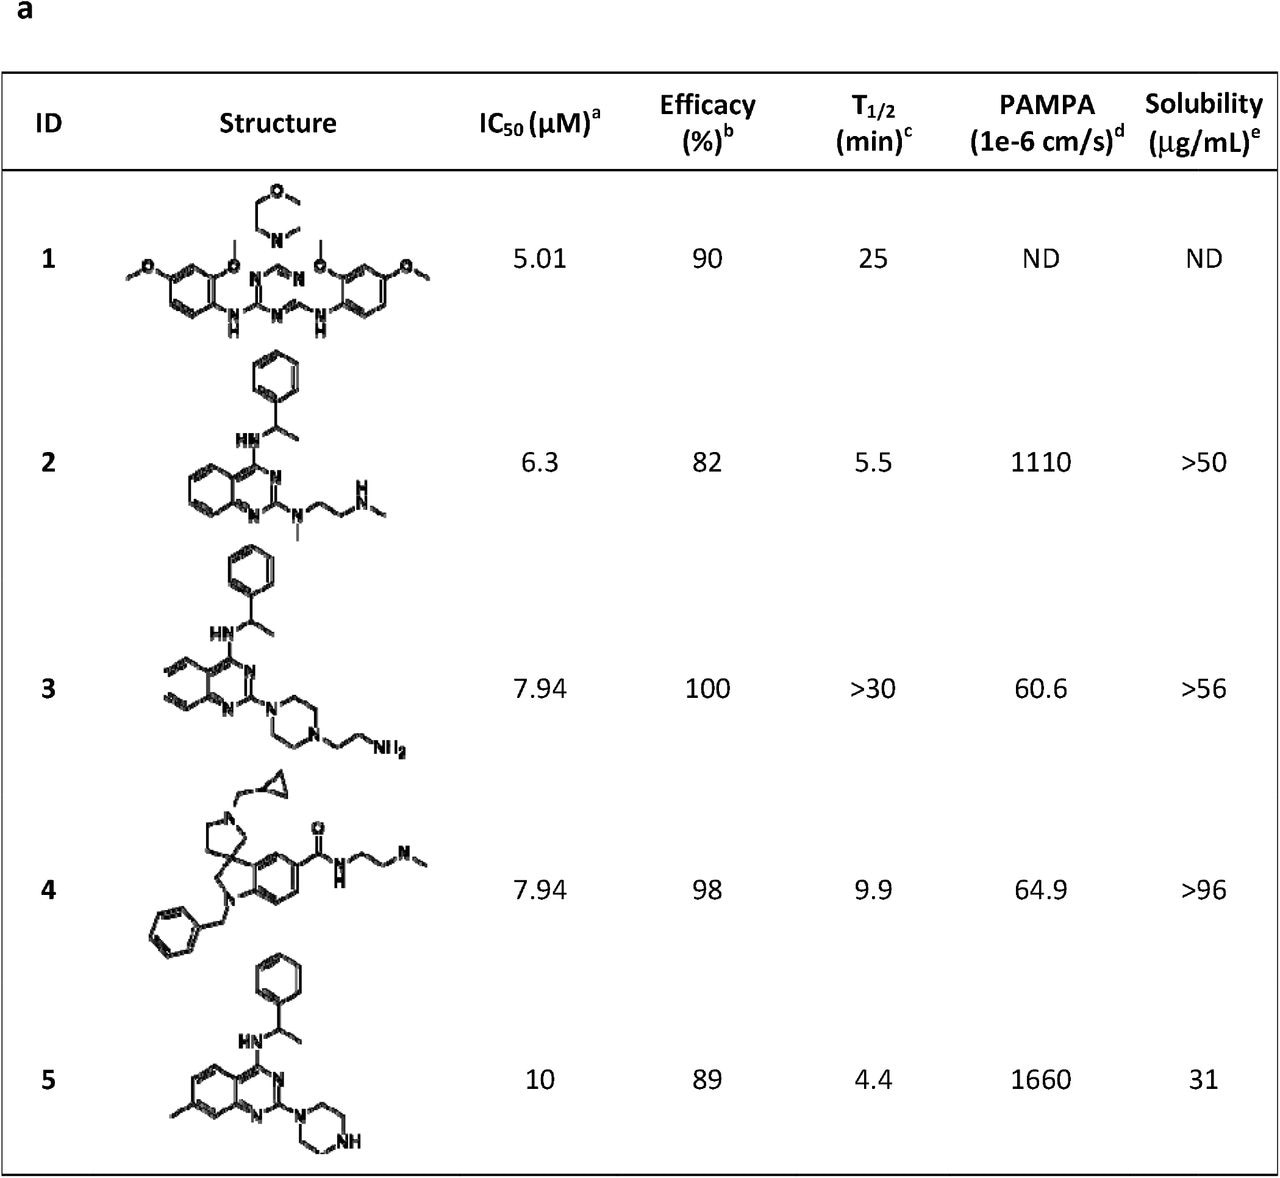 Five most potent and efficacious compounds identified, along with in vitro/physico-chemical ADME data. aIC50: half-maximal inhibitory concentration value obtained from the CPE assay in 8-point dose response, measured in duplicate. bEfficacy: maximum inhibitory effect observed in CPE assay. cT1/2: metabolic half-life measured in rat liver microsome lysates reported in minutes, with a minimum detectable half-life of 1 minute. dPAMPA (parallel artificial membrane permeation assay) is reported as a metric of the passive permeability of the compounds (1×10−6 cm/s). eSolubility – pION μSOL assay for kinetic aqueous solubility determination, pH 7.4. b. Three chemotypes (A-C) identified as active in the CPE assay.